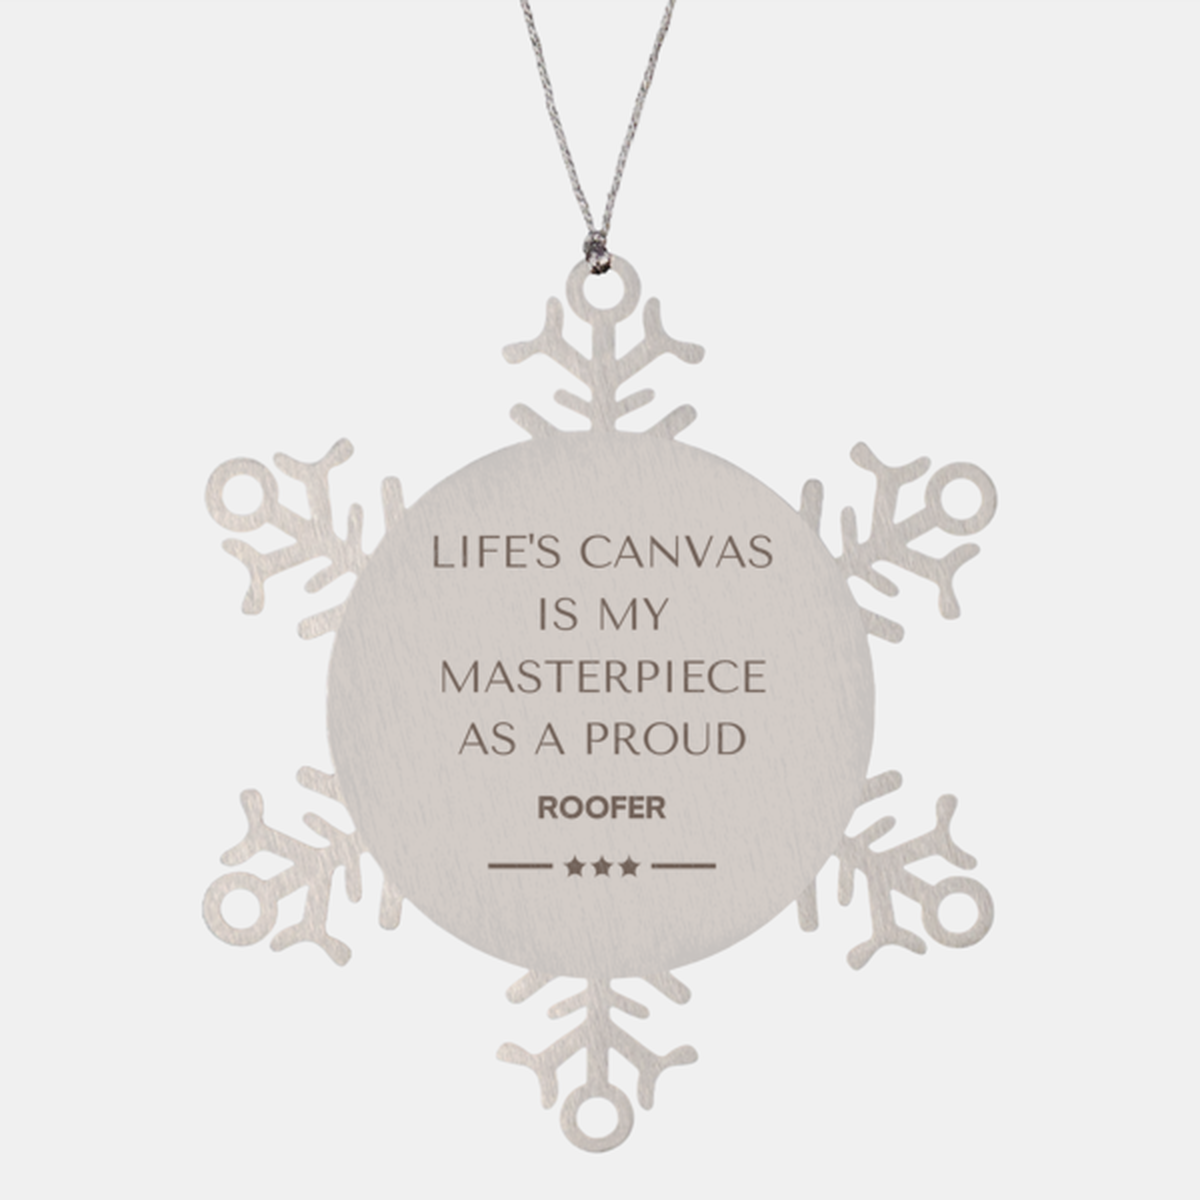 Proud Roofer Gifts, Life's canvas is my masterpiece, Epic Birthday Christmas Unique Snowflake Ornament For Roofer, Coworkers, Men, Women, Friends